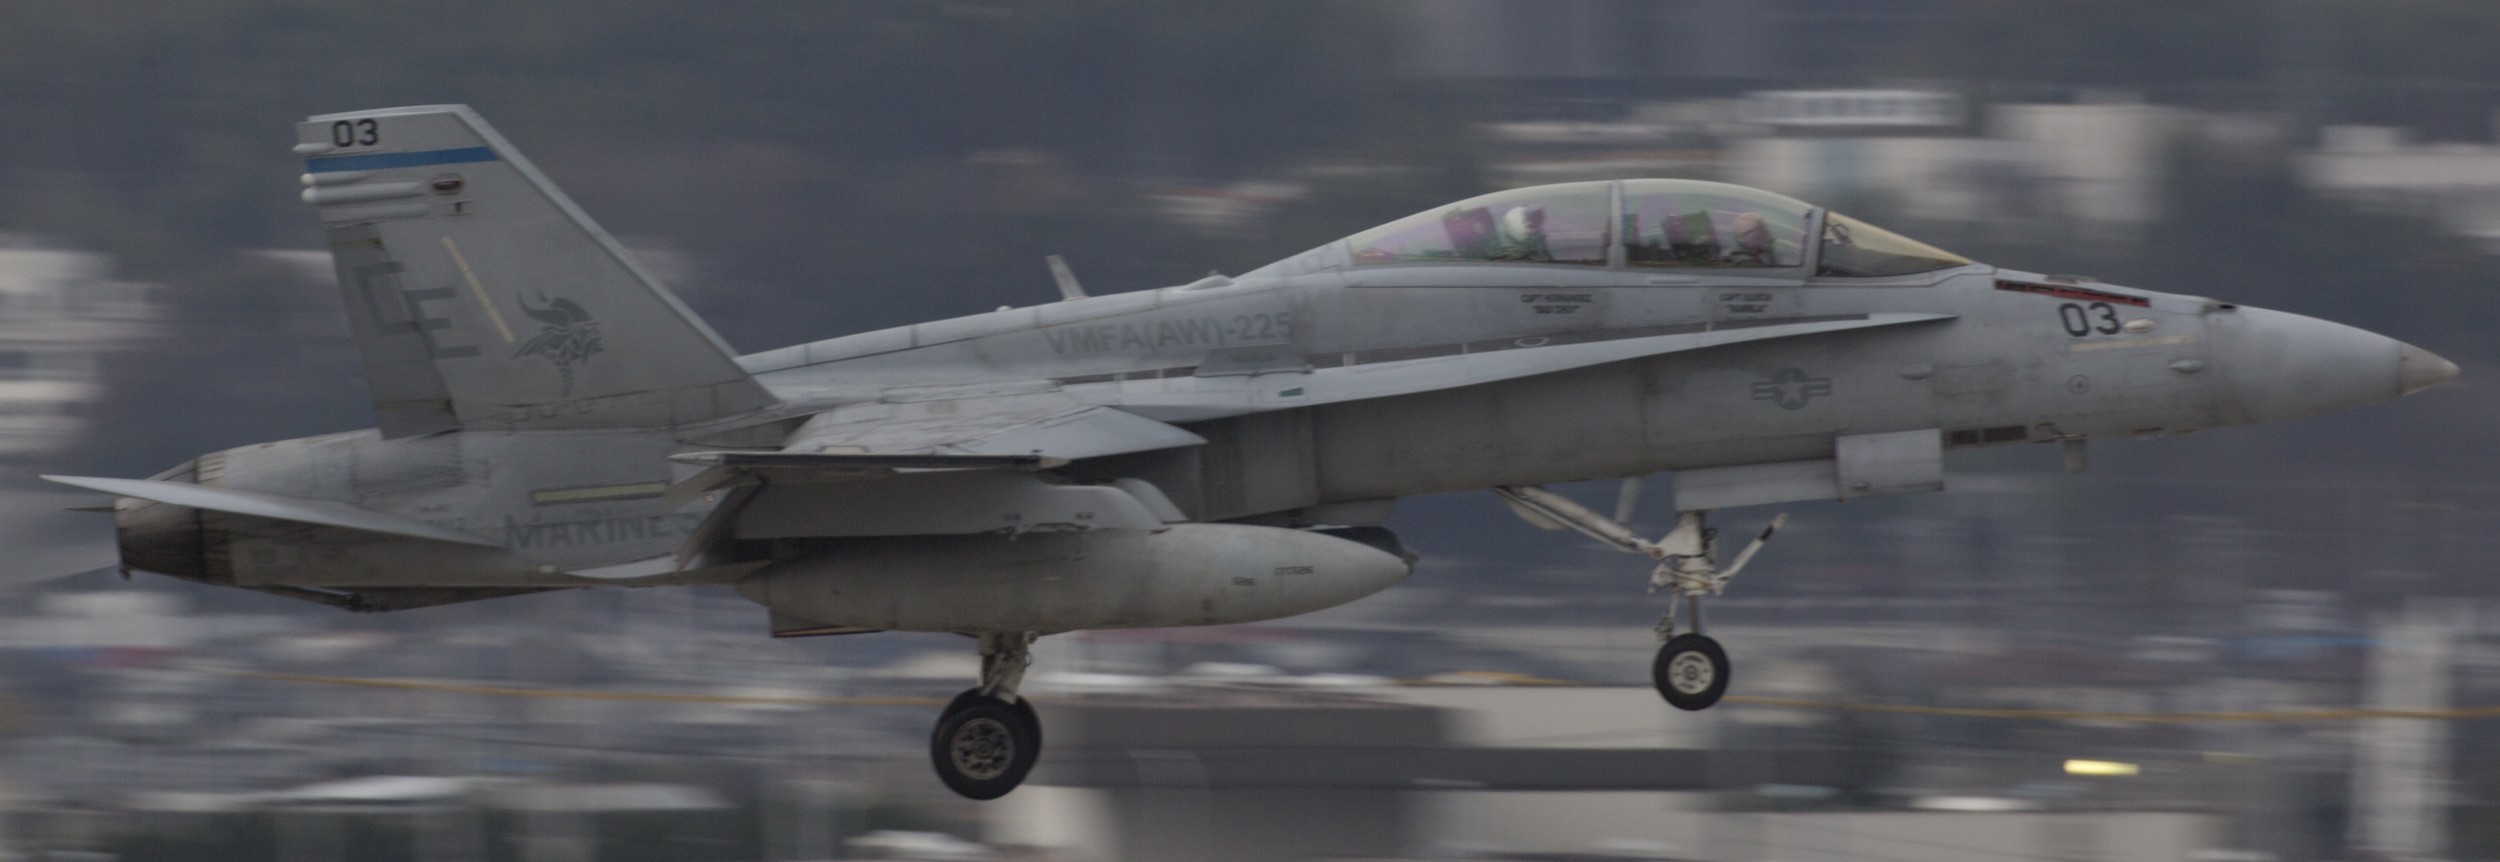 vmfa(aw)-225 vikings marine fighter attack squadron f/a-18d hornet 19